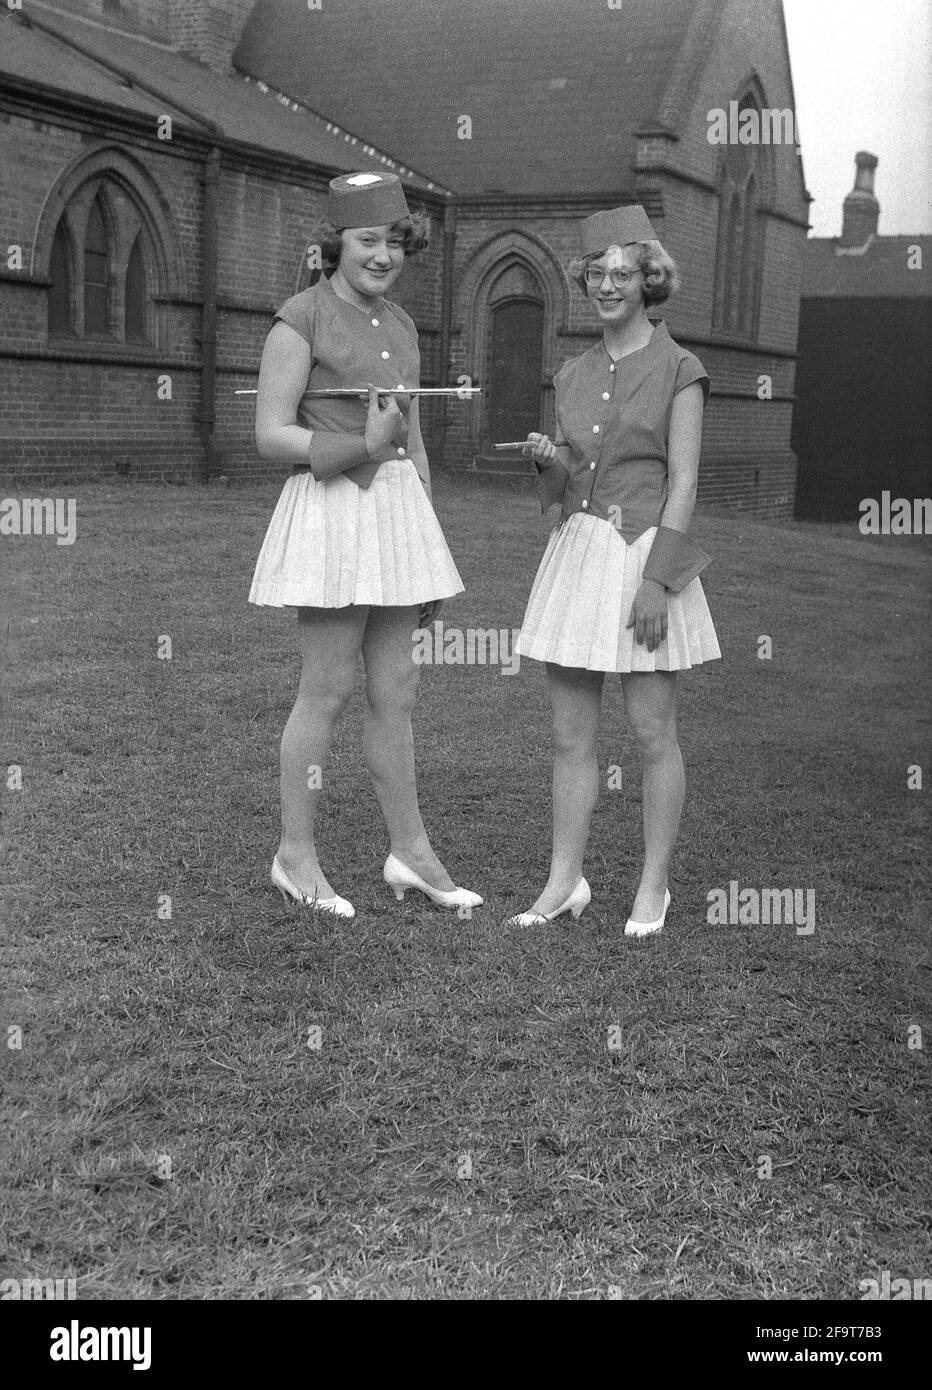 1956, historical, outside in the grounds of church, standing for their photo, two young ladies in their costumes for the traditional May Queen procession, England, UK. In many Englsih villages, the May Day celebrations involved the crowning of a May Queen and dancing around a Maypole, actiitvities that have taken place in England for centuries. Selected from the girls of the area, the May Queen wearing a crown, would start the procession and the parade of floats and dancing. In the industrialised North of England, the Church Sunday Schools often led the organisation of the day. Stock Photo